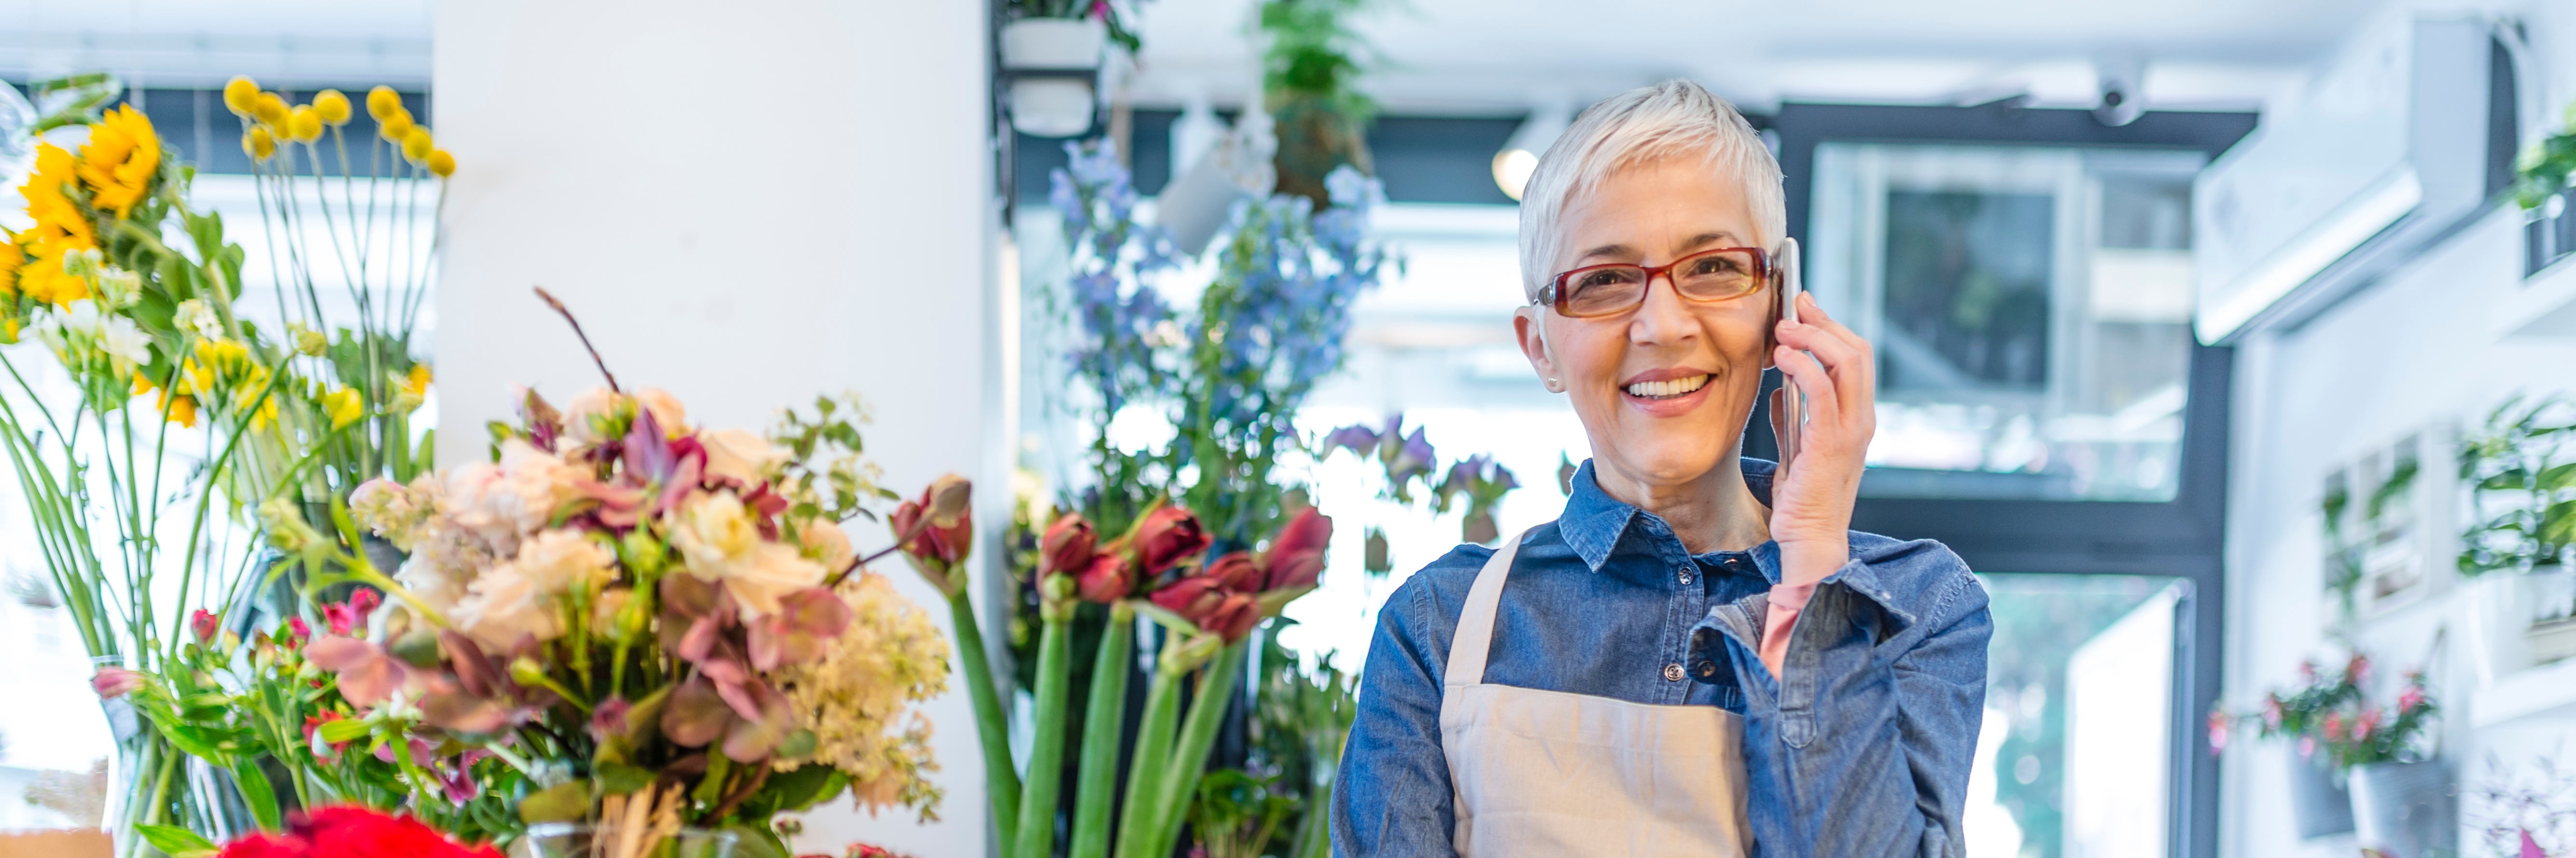 Mature flower shop owner at her small business